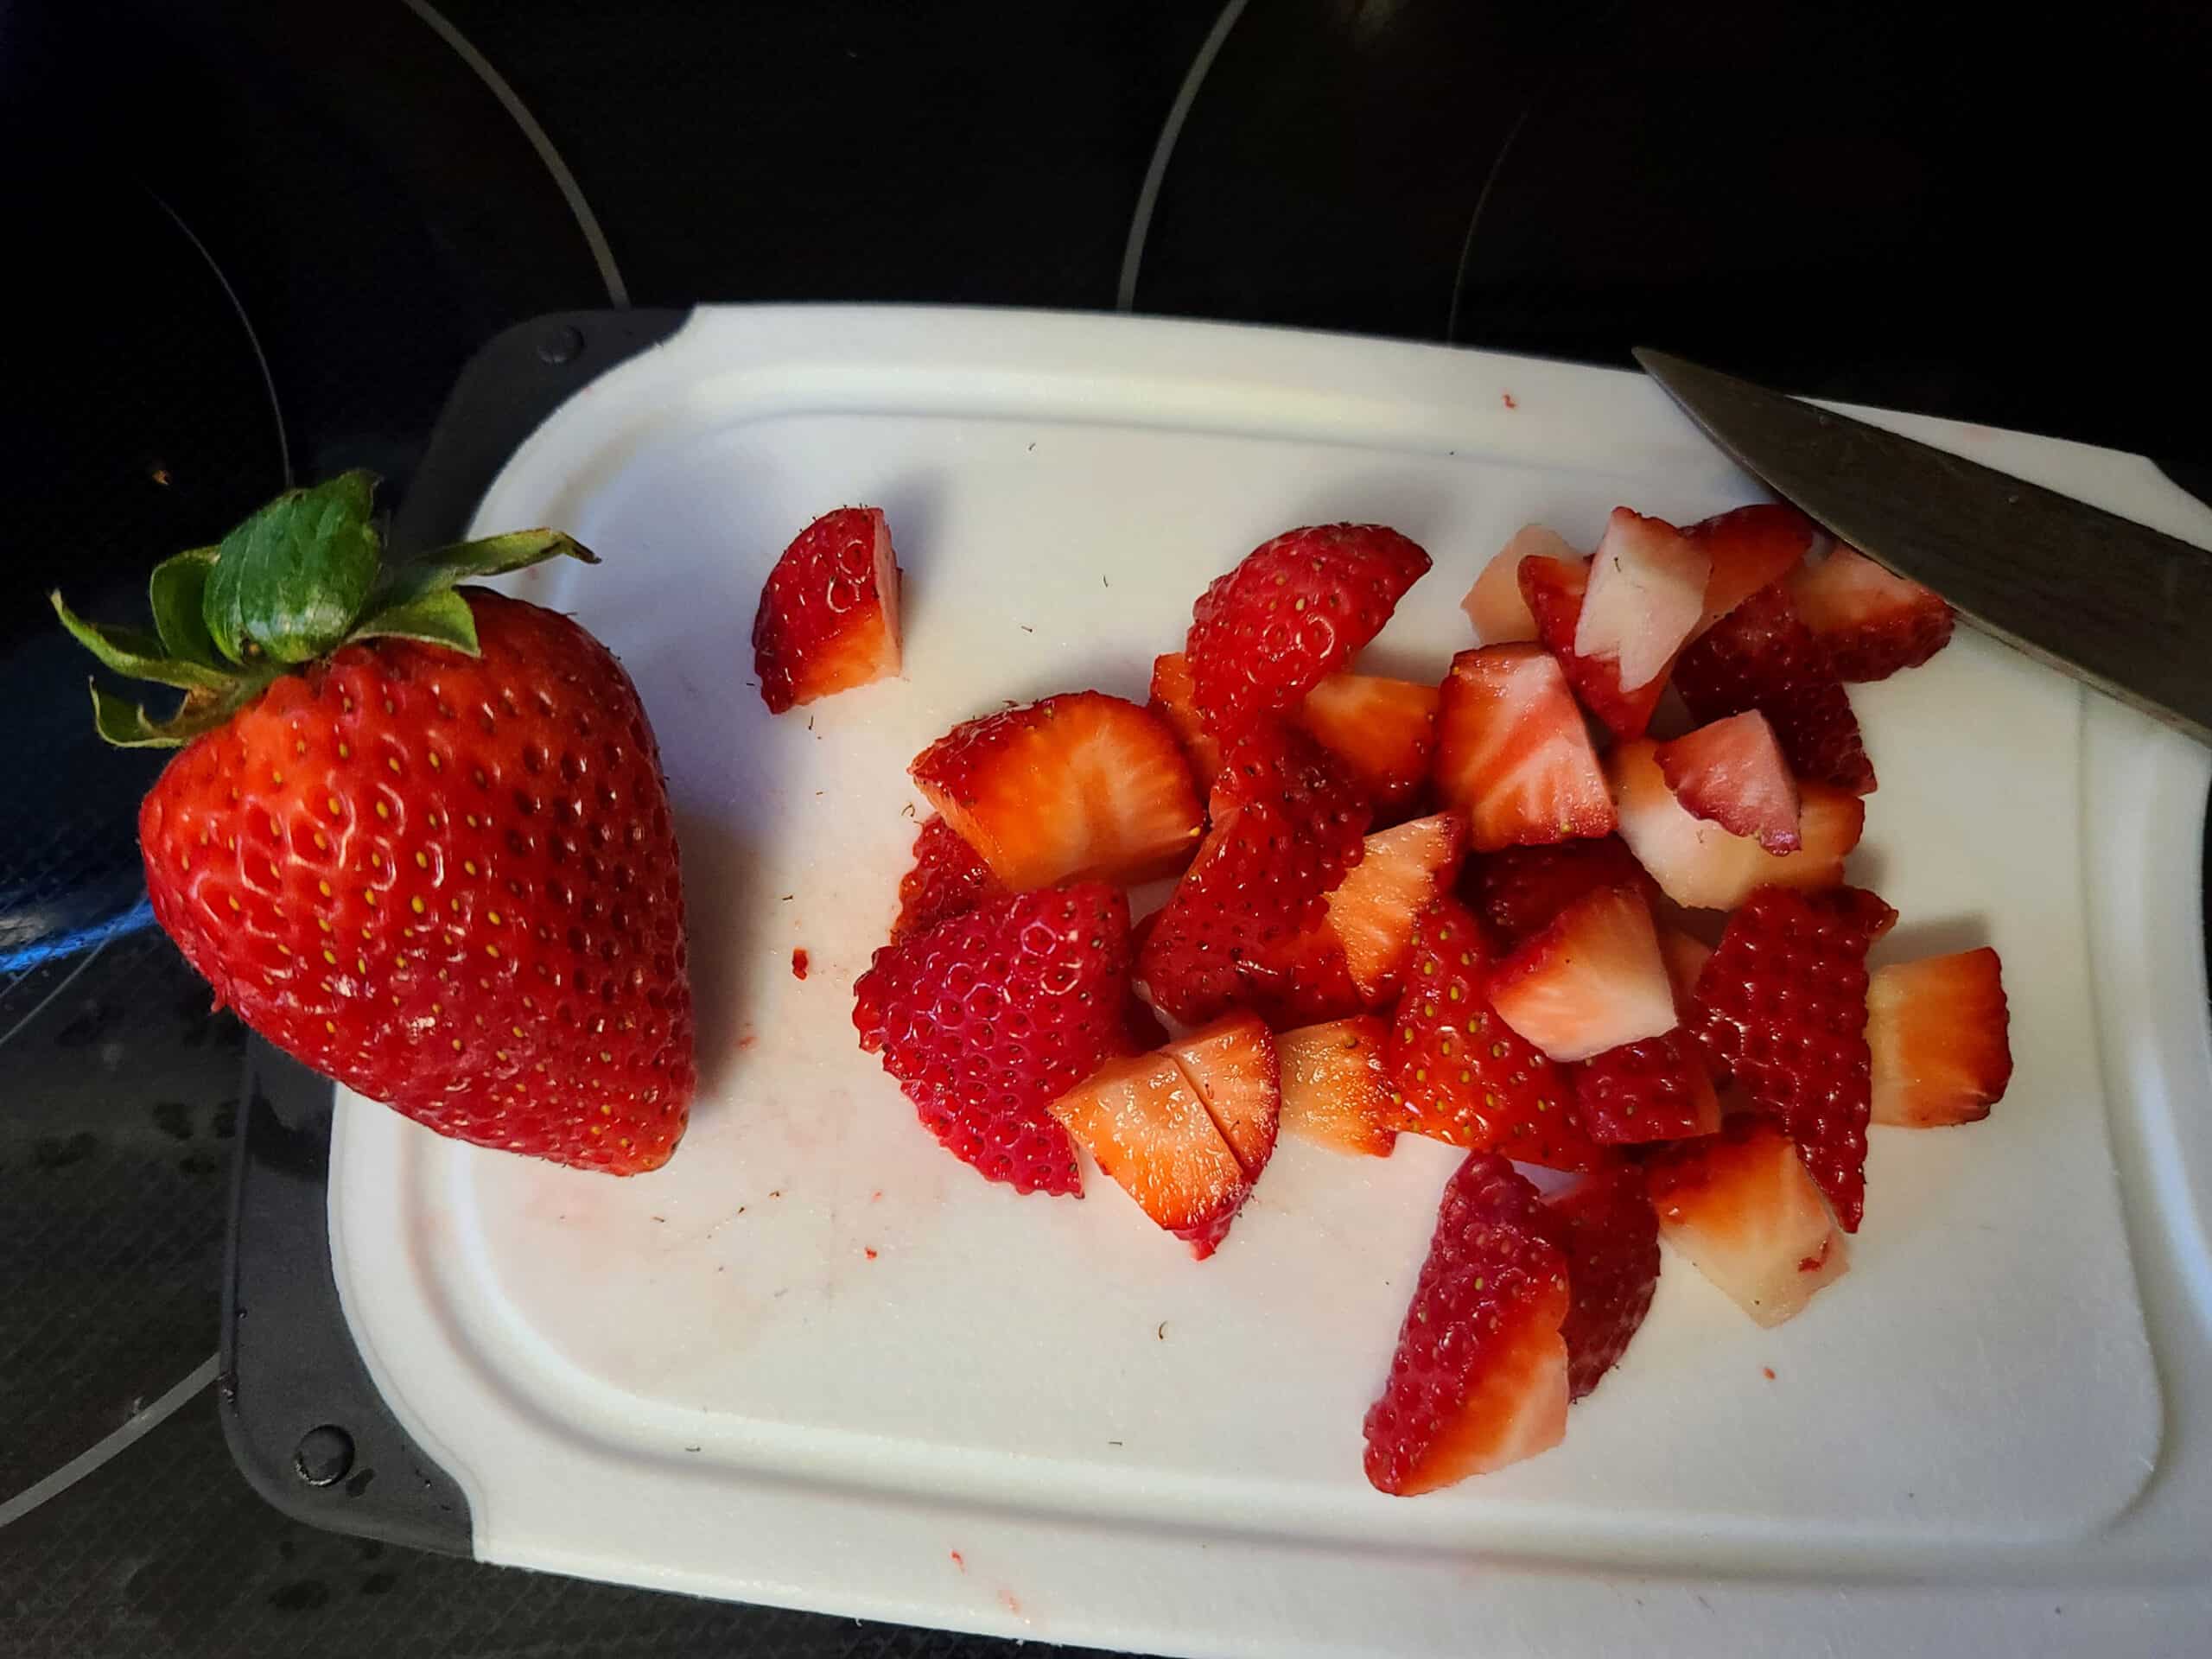 Strawberries being chopped on a white cutting board.